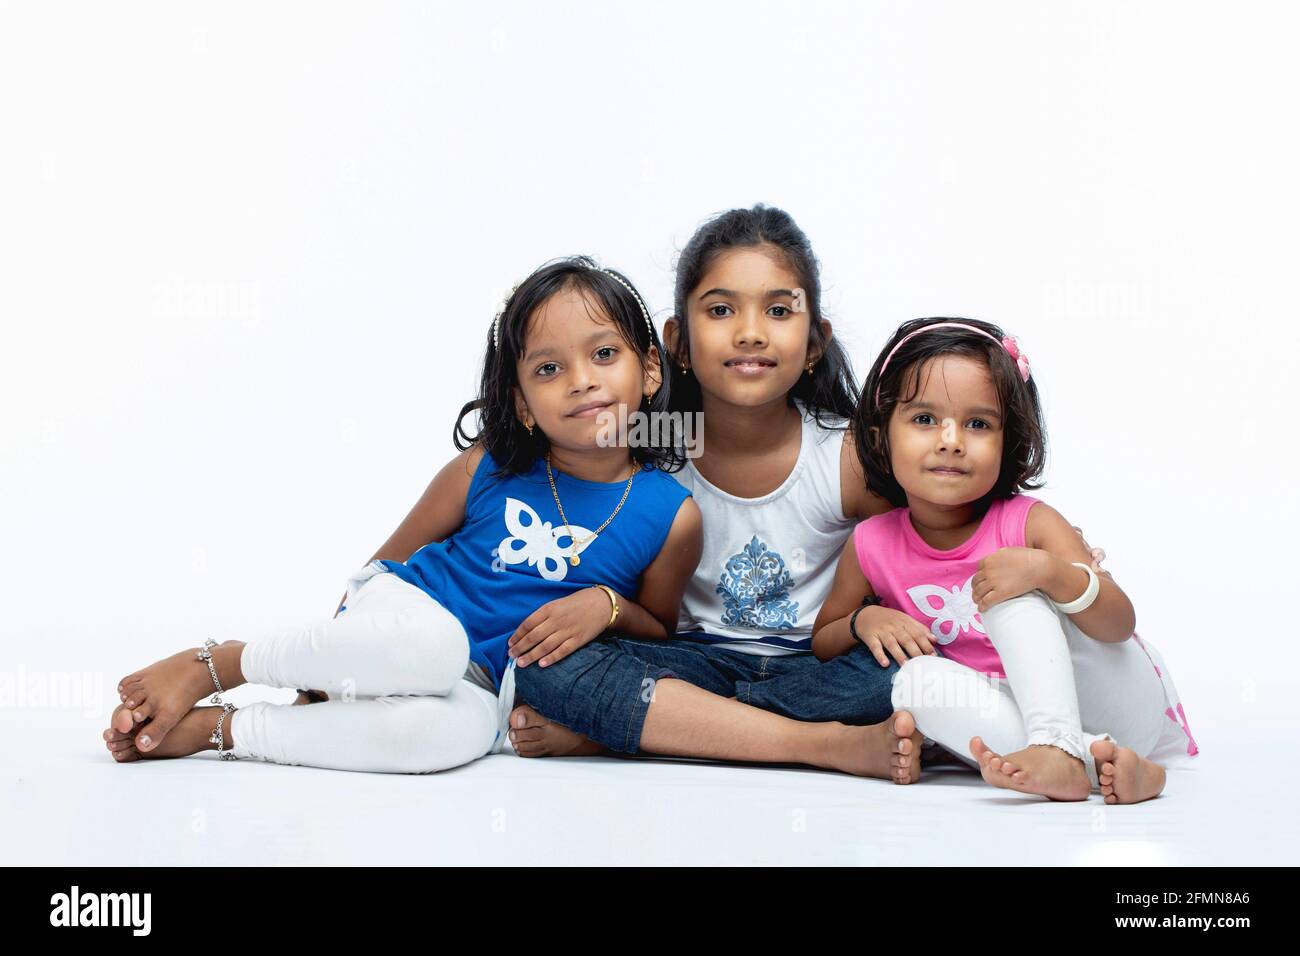 Indian Kids,portrait of three Indian girl kids ,isolated on white background. Stock Photo